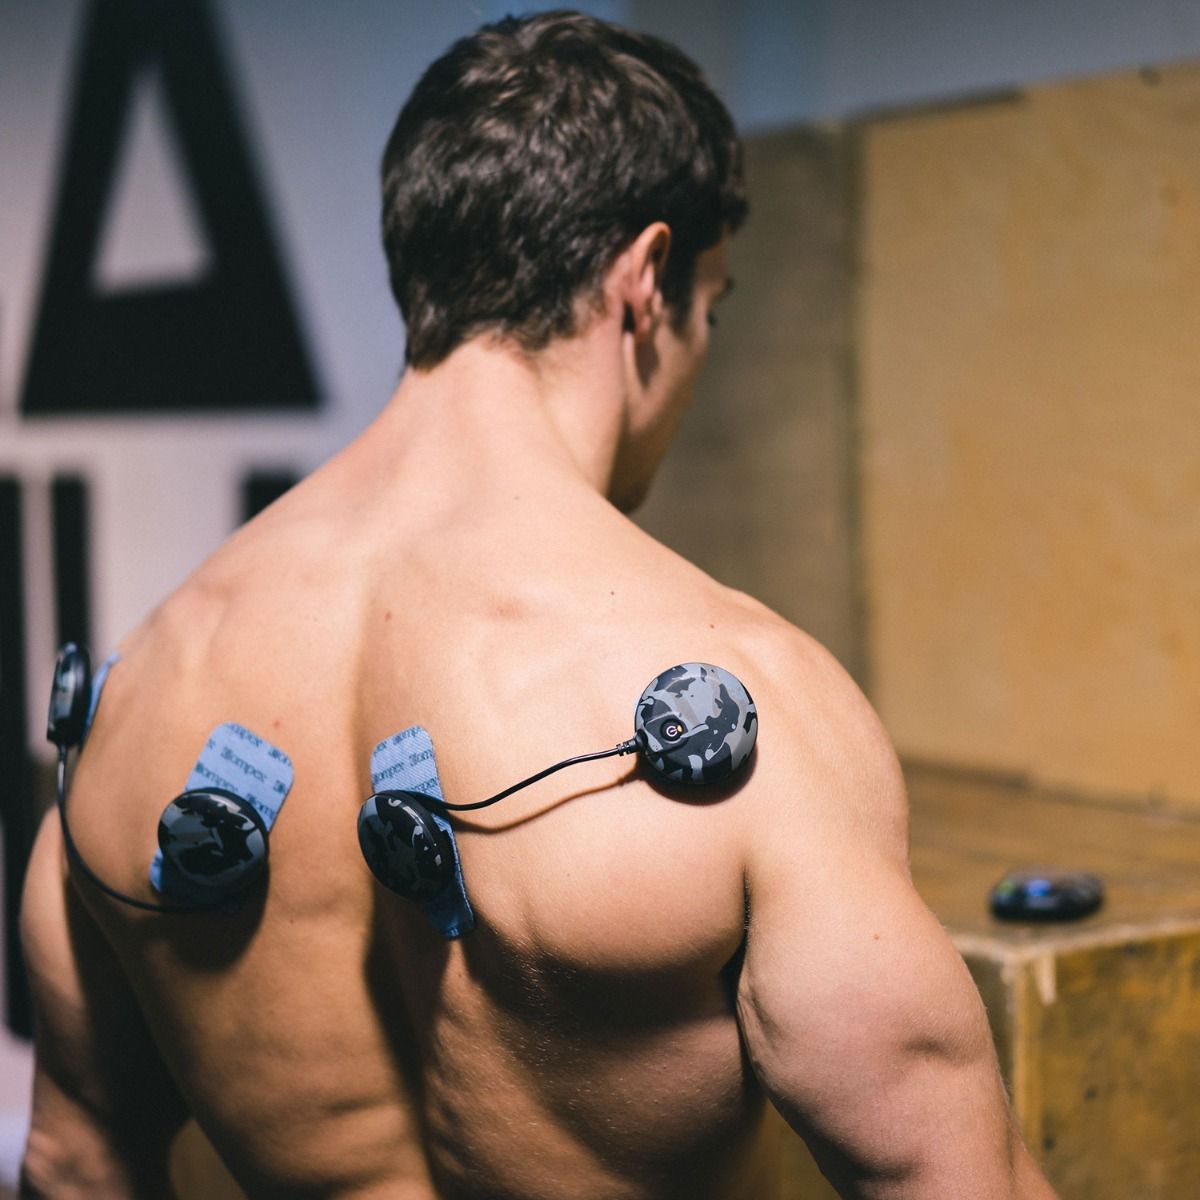 Compex France - #promo SP 8.0 WOD Edition ! 😍 👉SP8.0 WOD : http